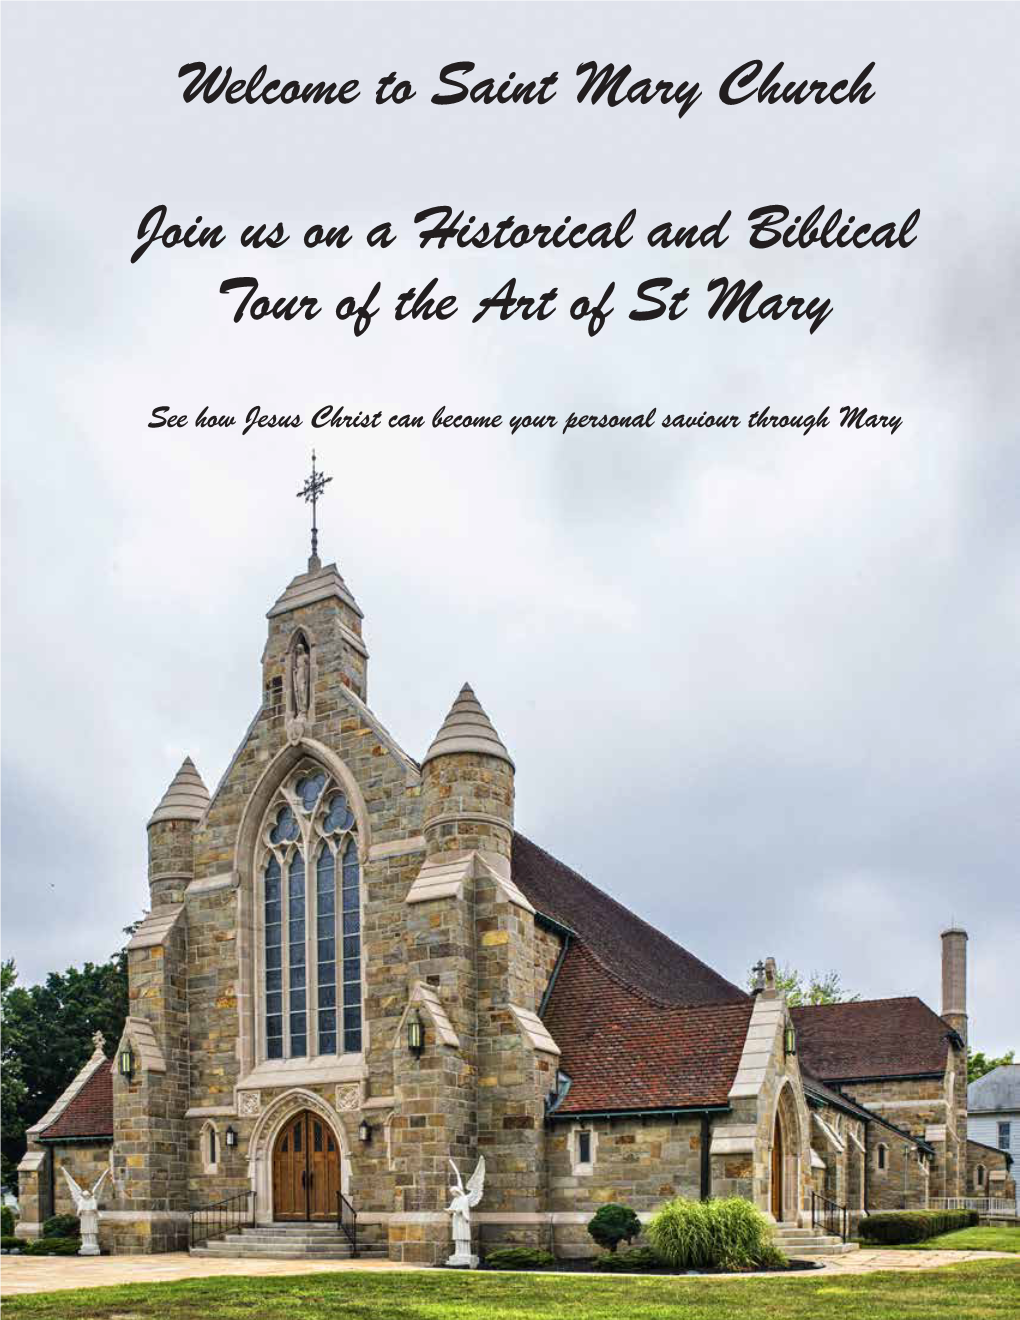 Saint Mary Church Join Us on a Historical and Biblical Tour of The